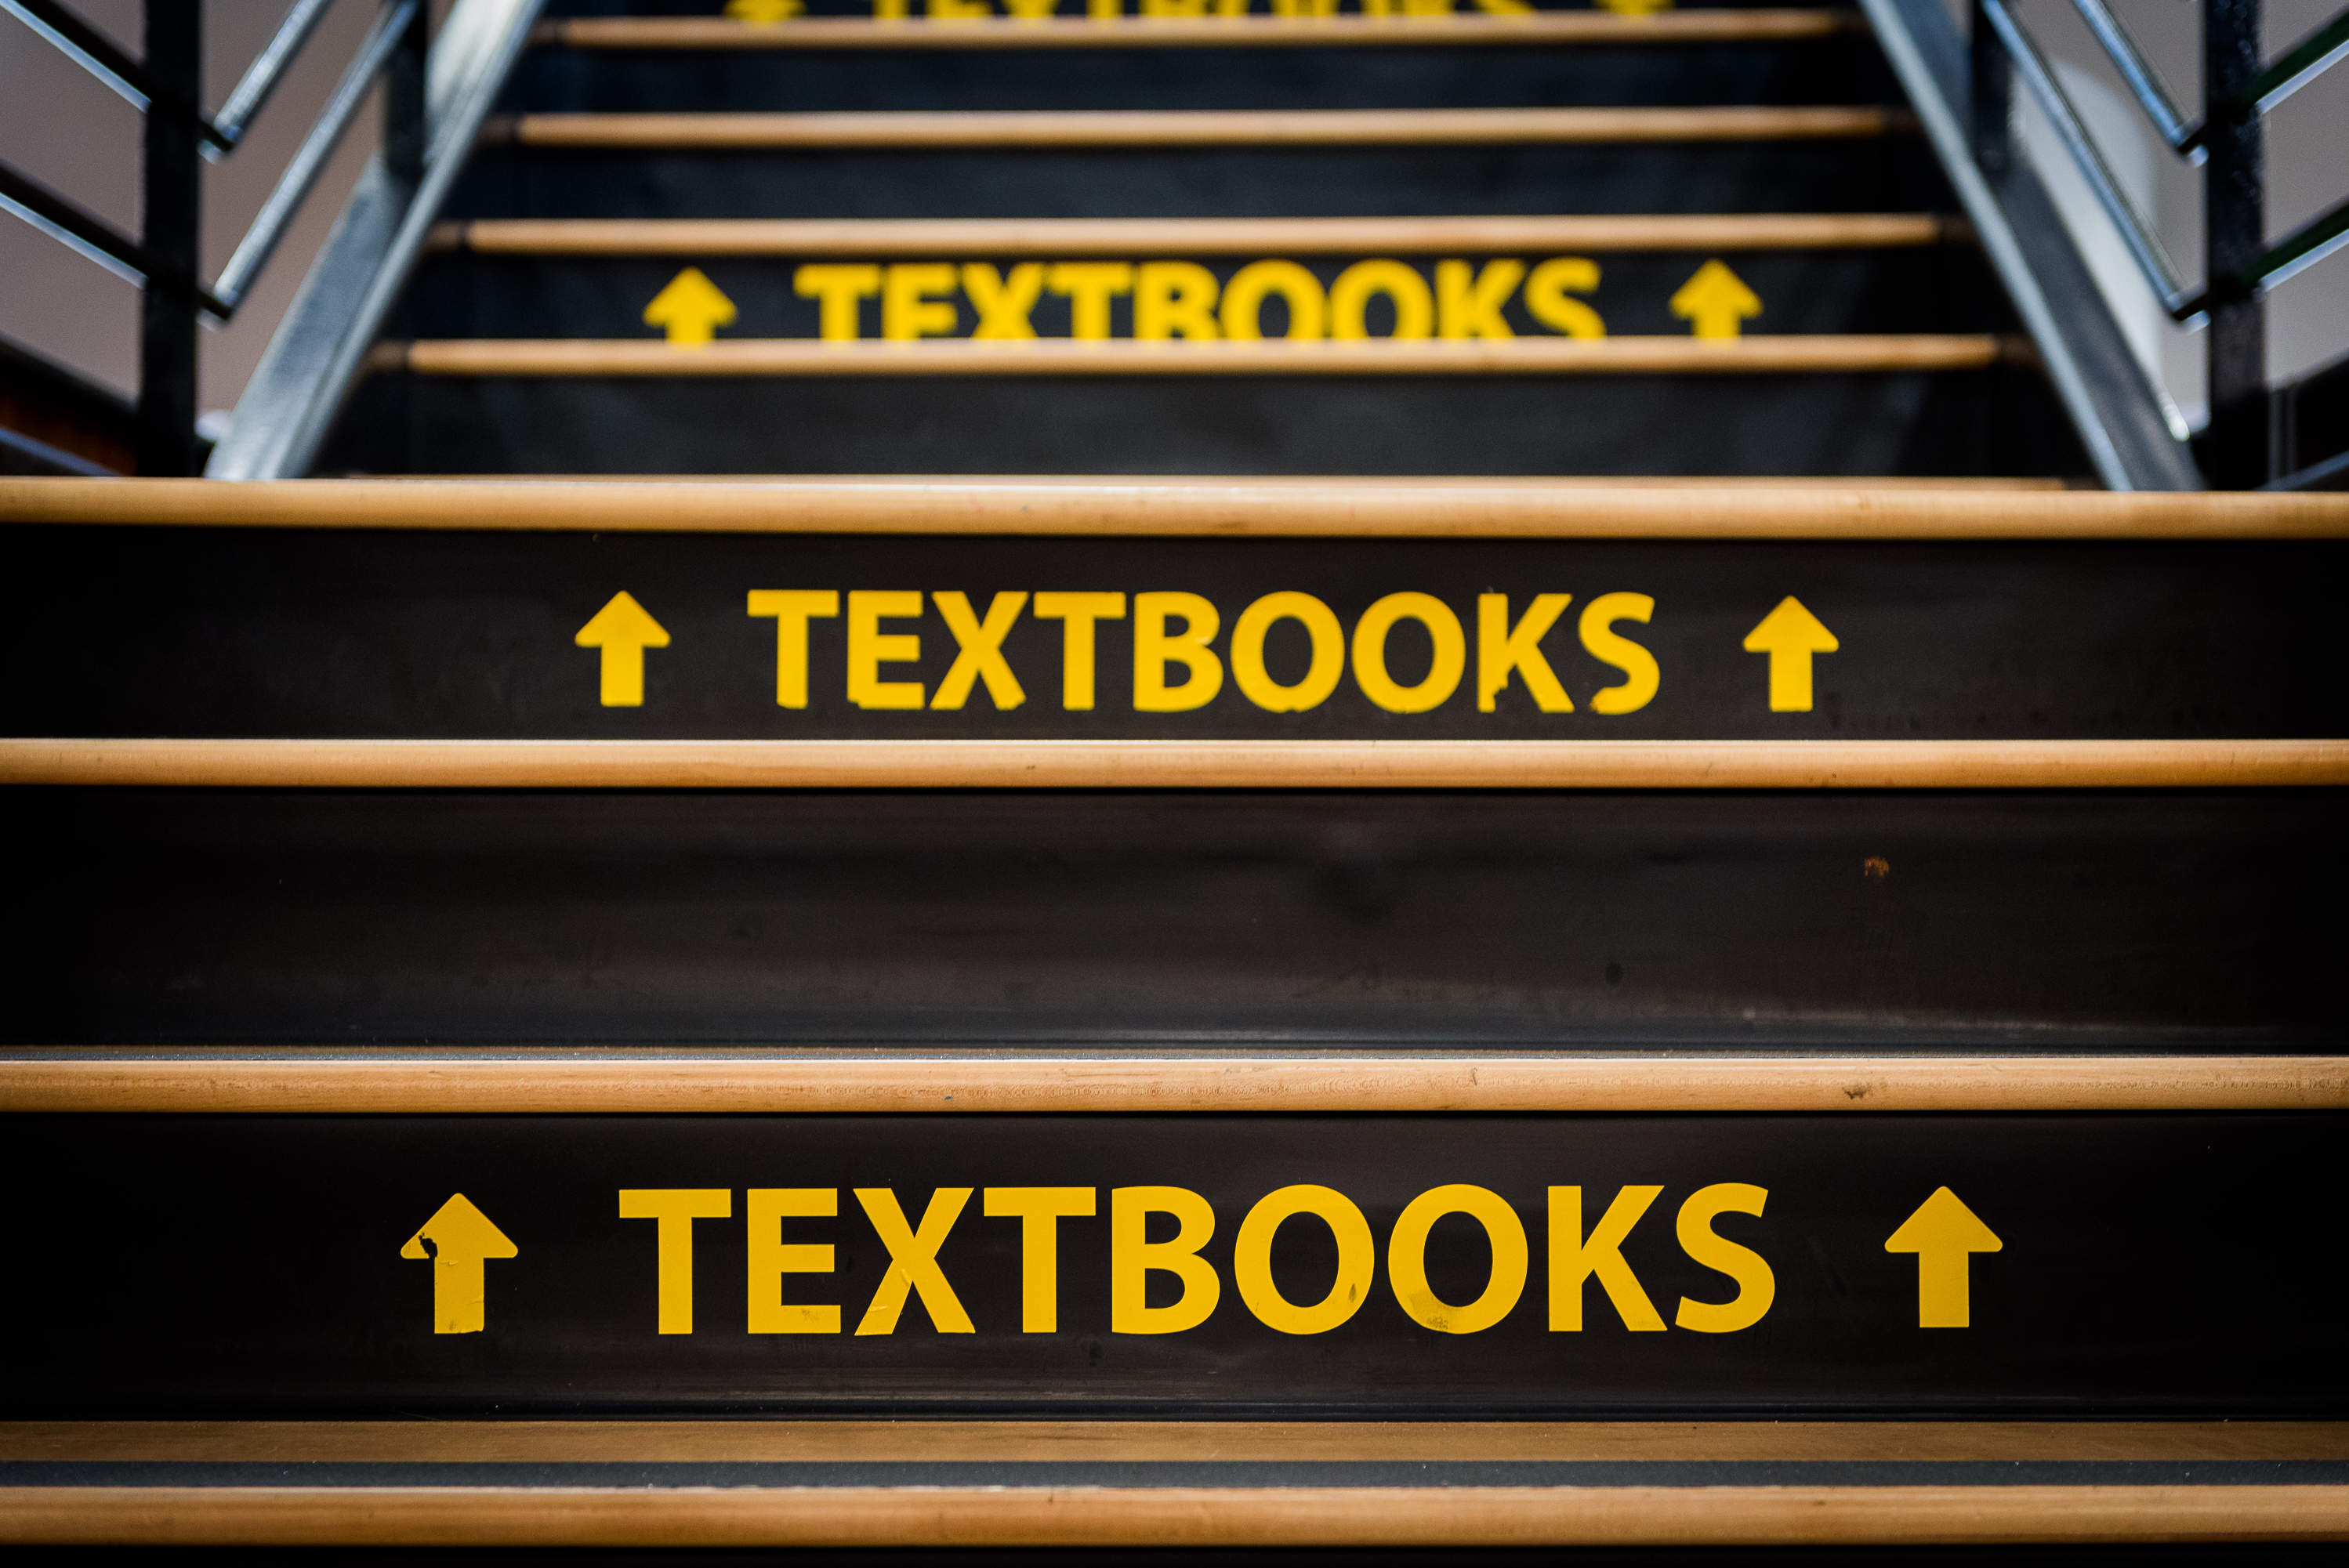 Opinion: Textbooks are criminally overpriced